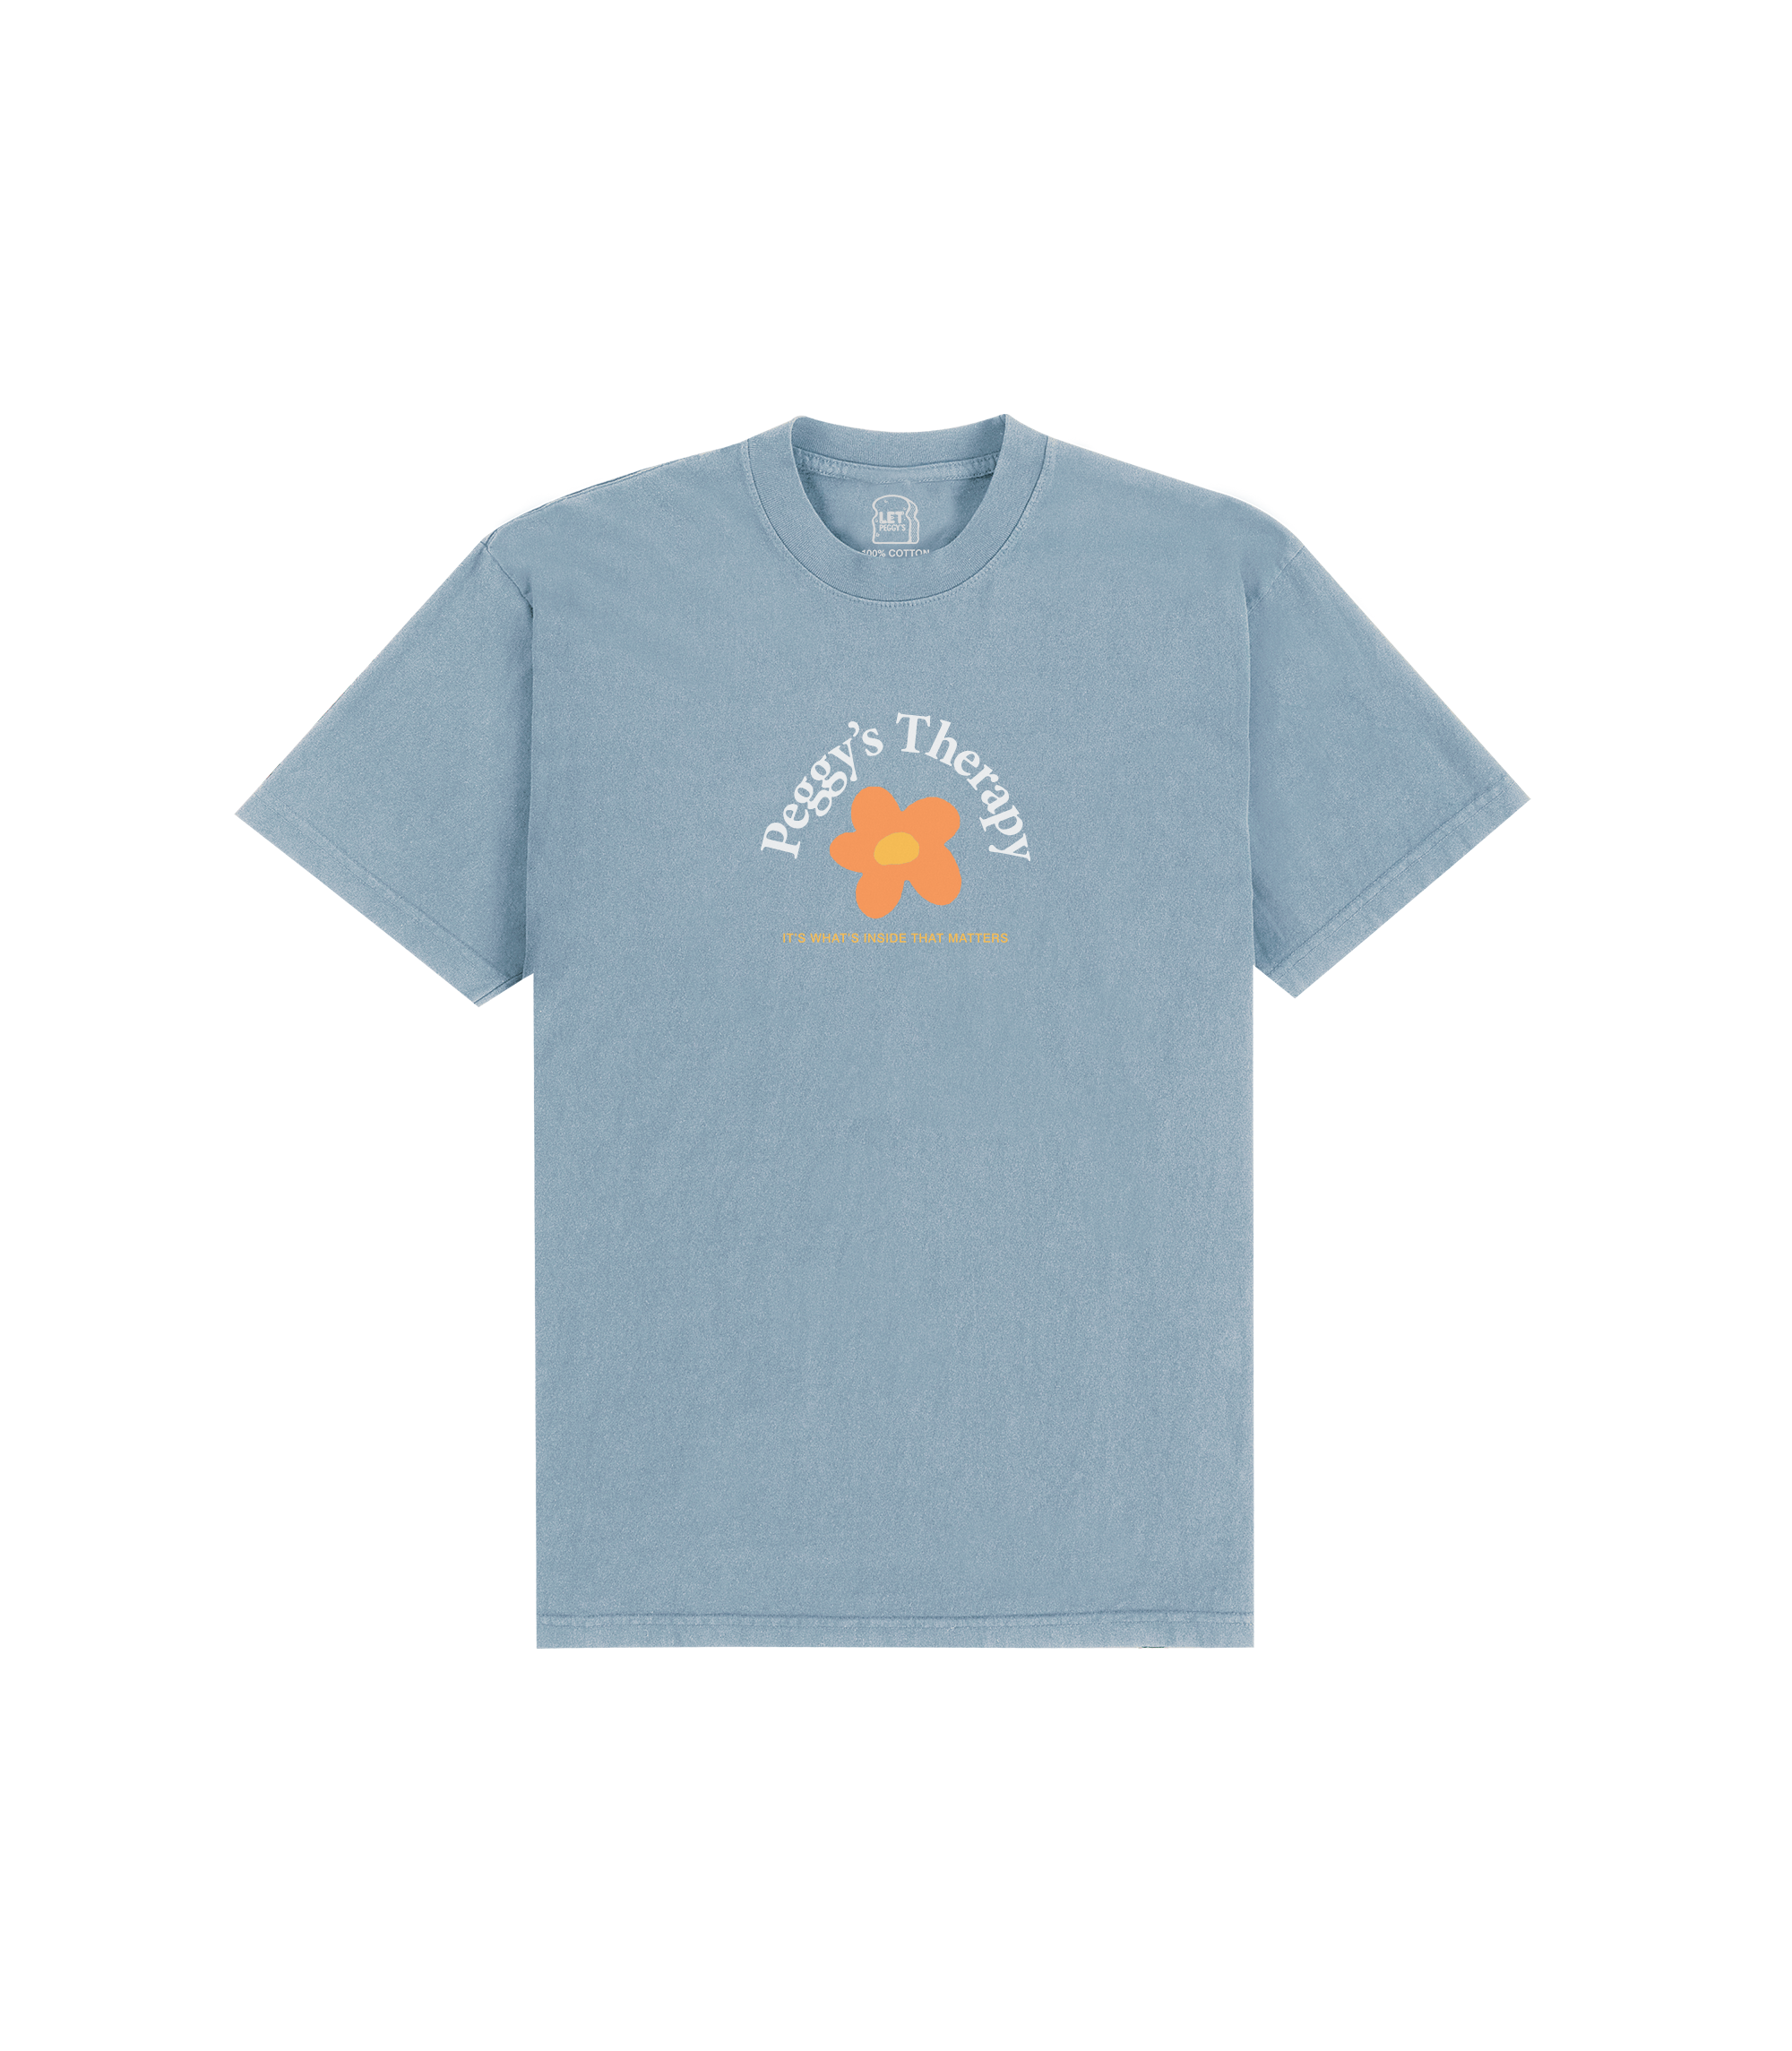 Peggys Therapy T-Shirt - Clear Blue